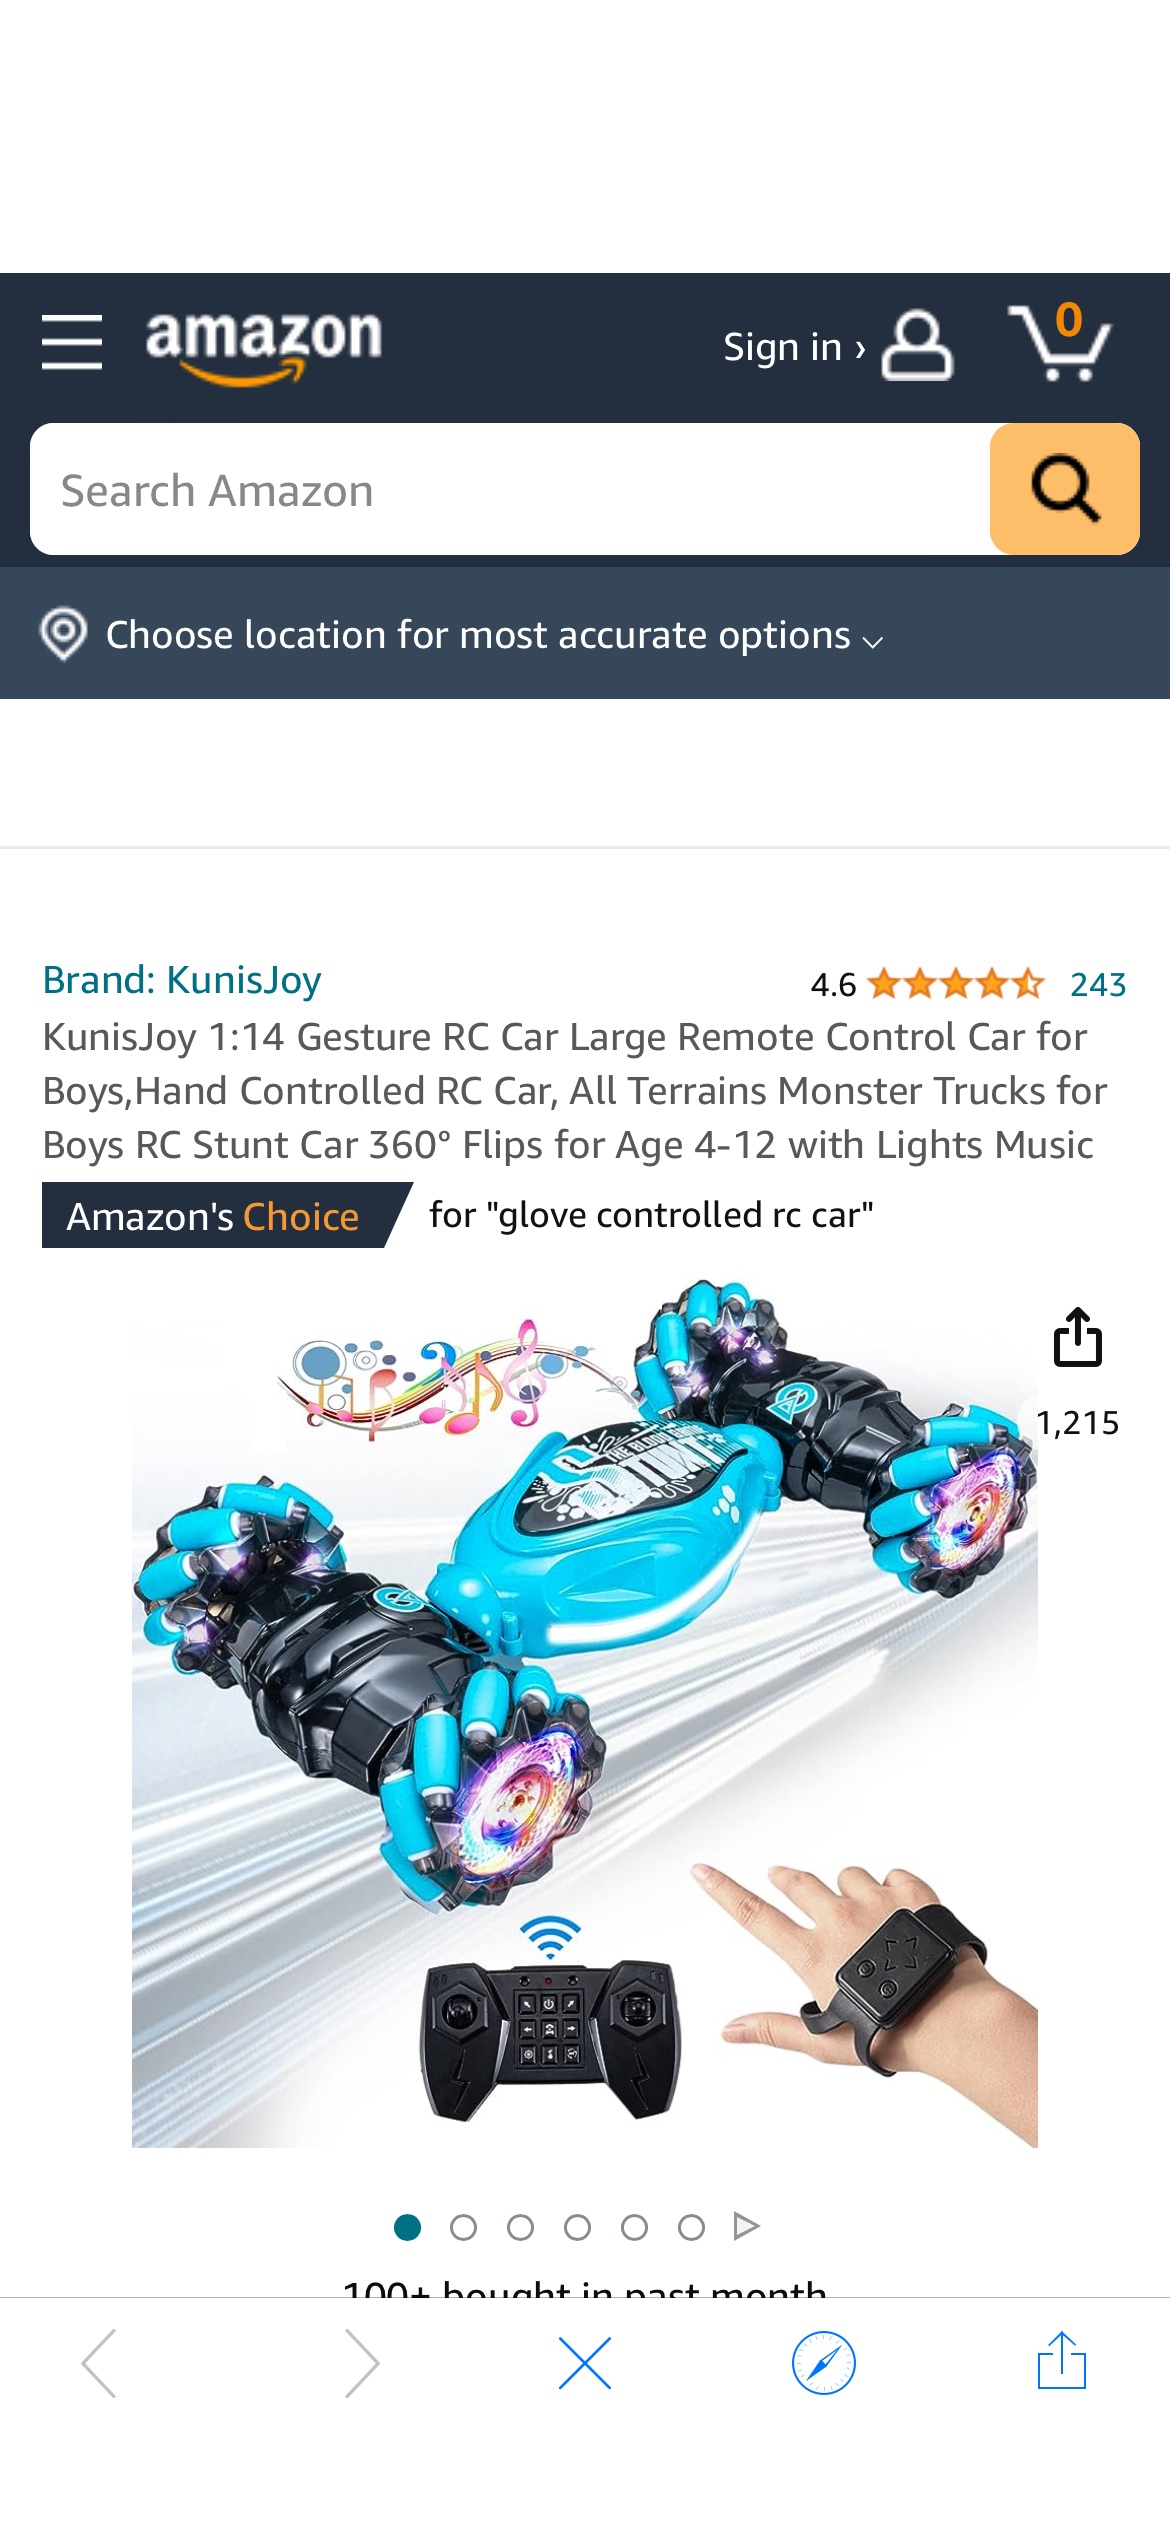 Amazon.com: KunisJoy 1:14 Gesture RC Car Large Remote Control Car for Boys,Hand Controlled RC Car, All Terrains Monster Trucks for Boys RC Stunt Car 360° Flips for Age 4-12 with Lights Music : Toys & 